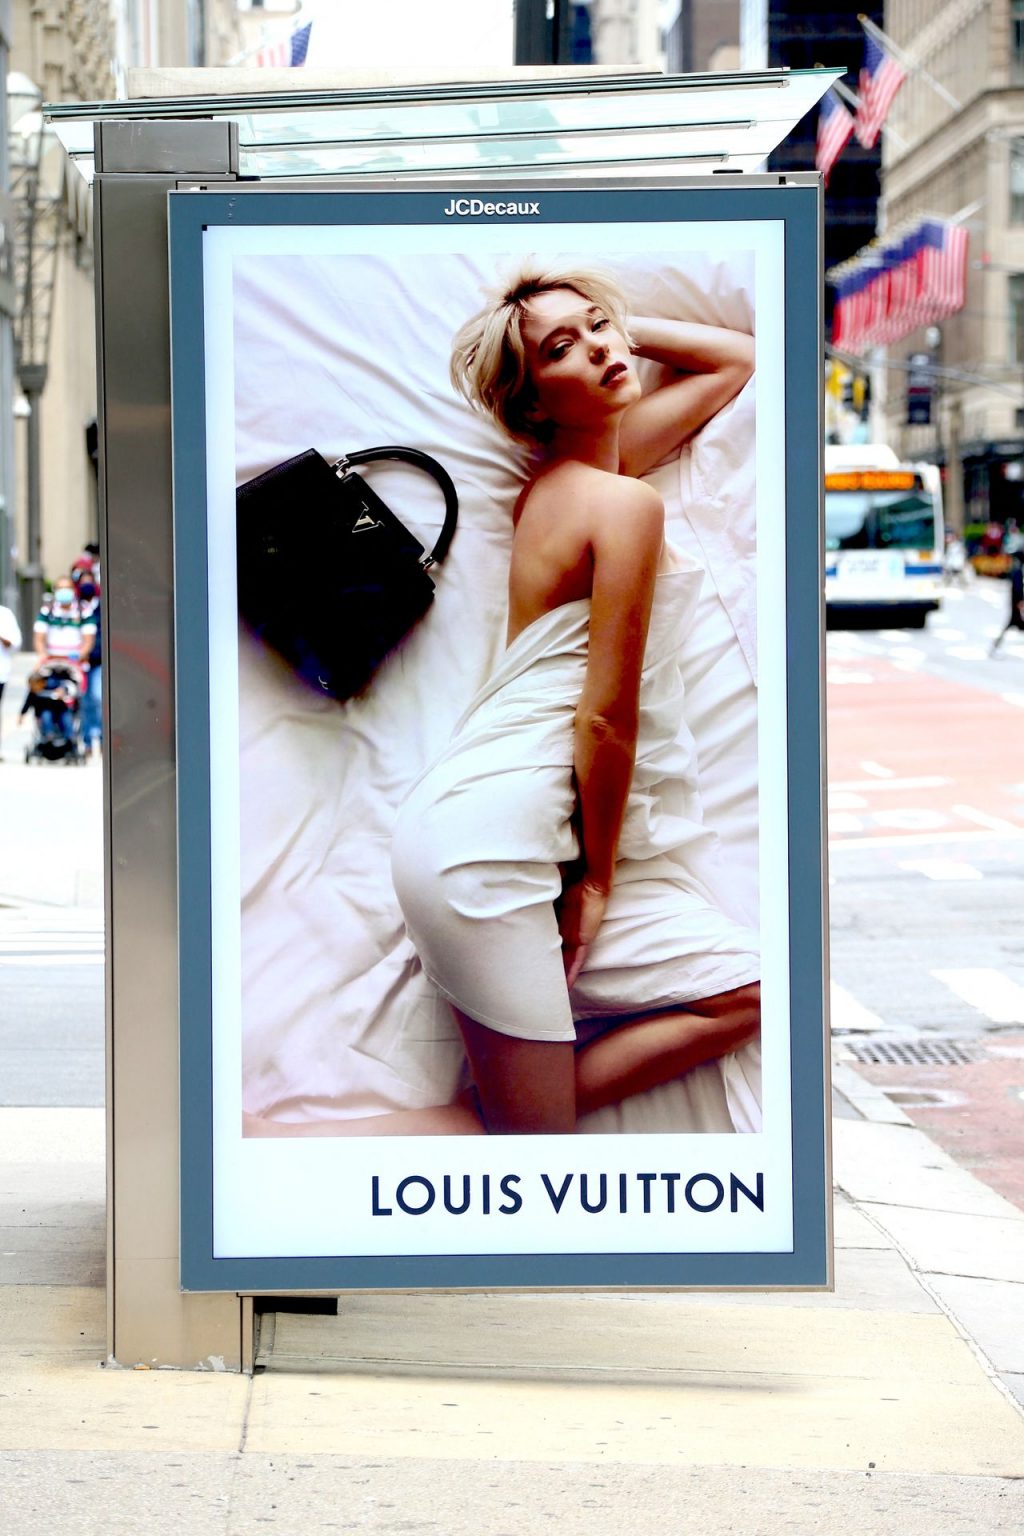 Lea Seydoux is Pictured On Louis Vuitton Ad in NYC (4 Photos)